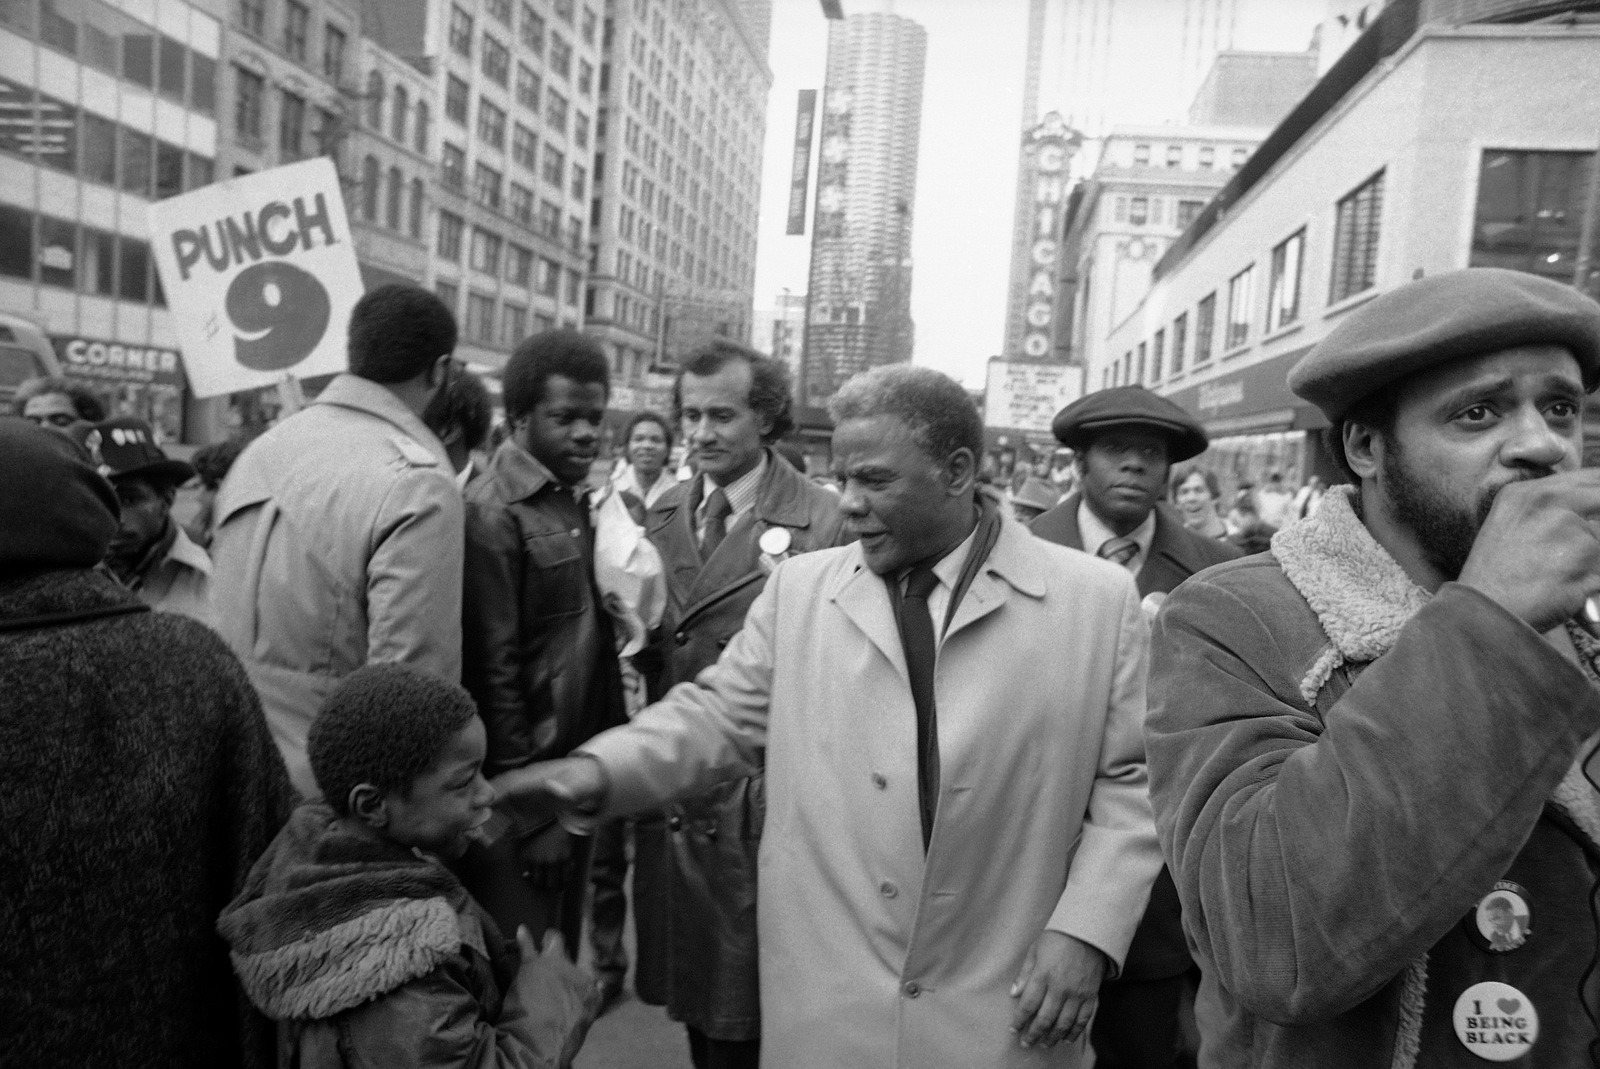 U.S. Rep. Harold Washington greets a younger member of the crowd as he campaigned along State Street in Chicago on, Feb. 22, 1983. (AP/Lee Balgemann)